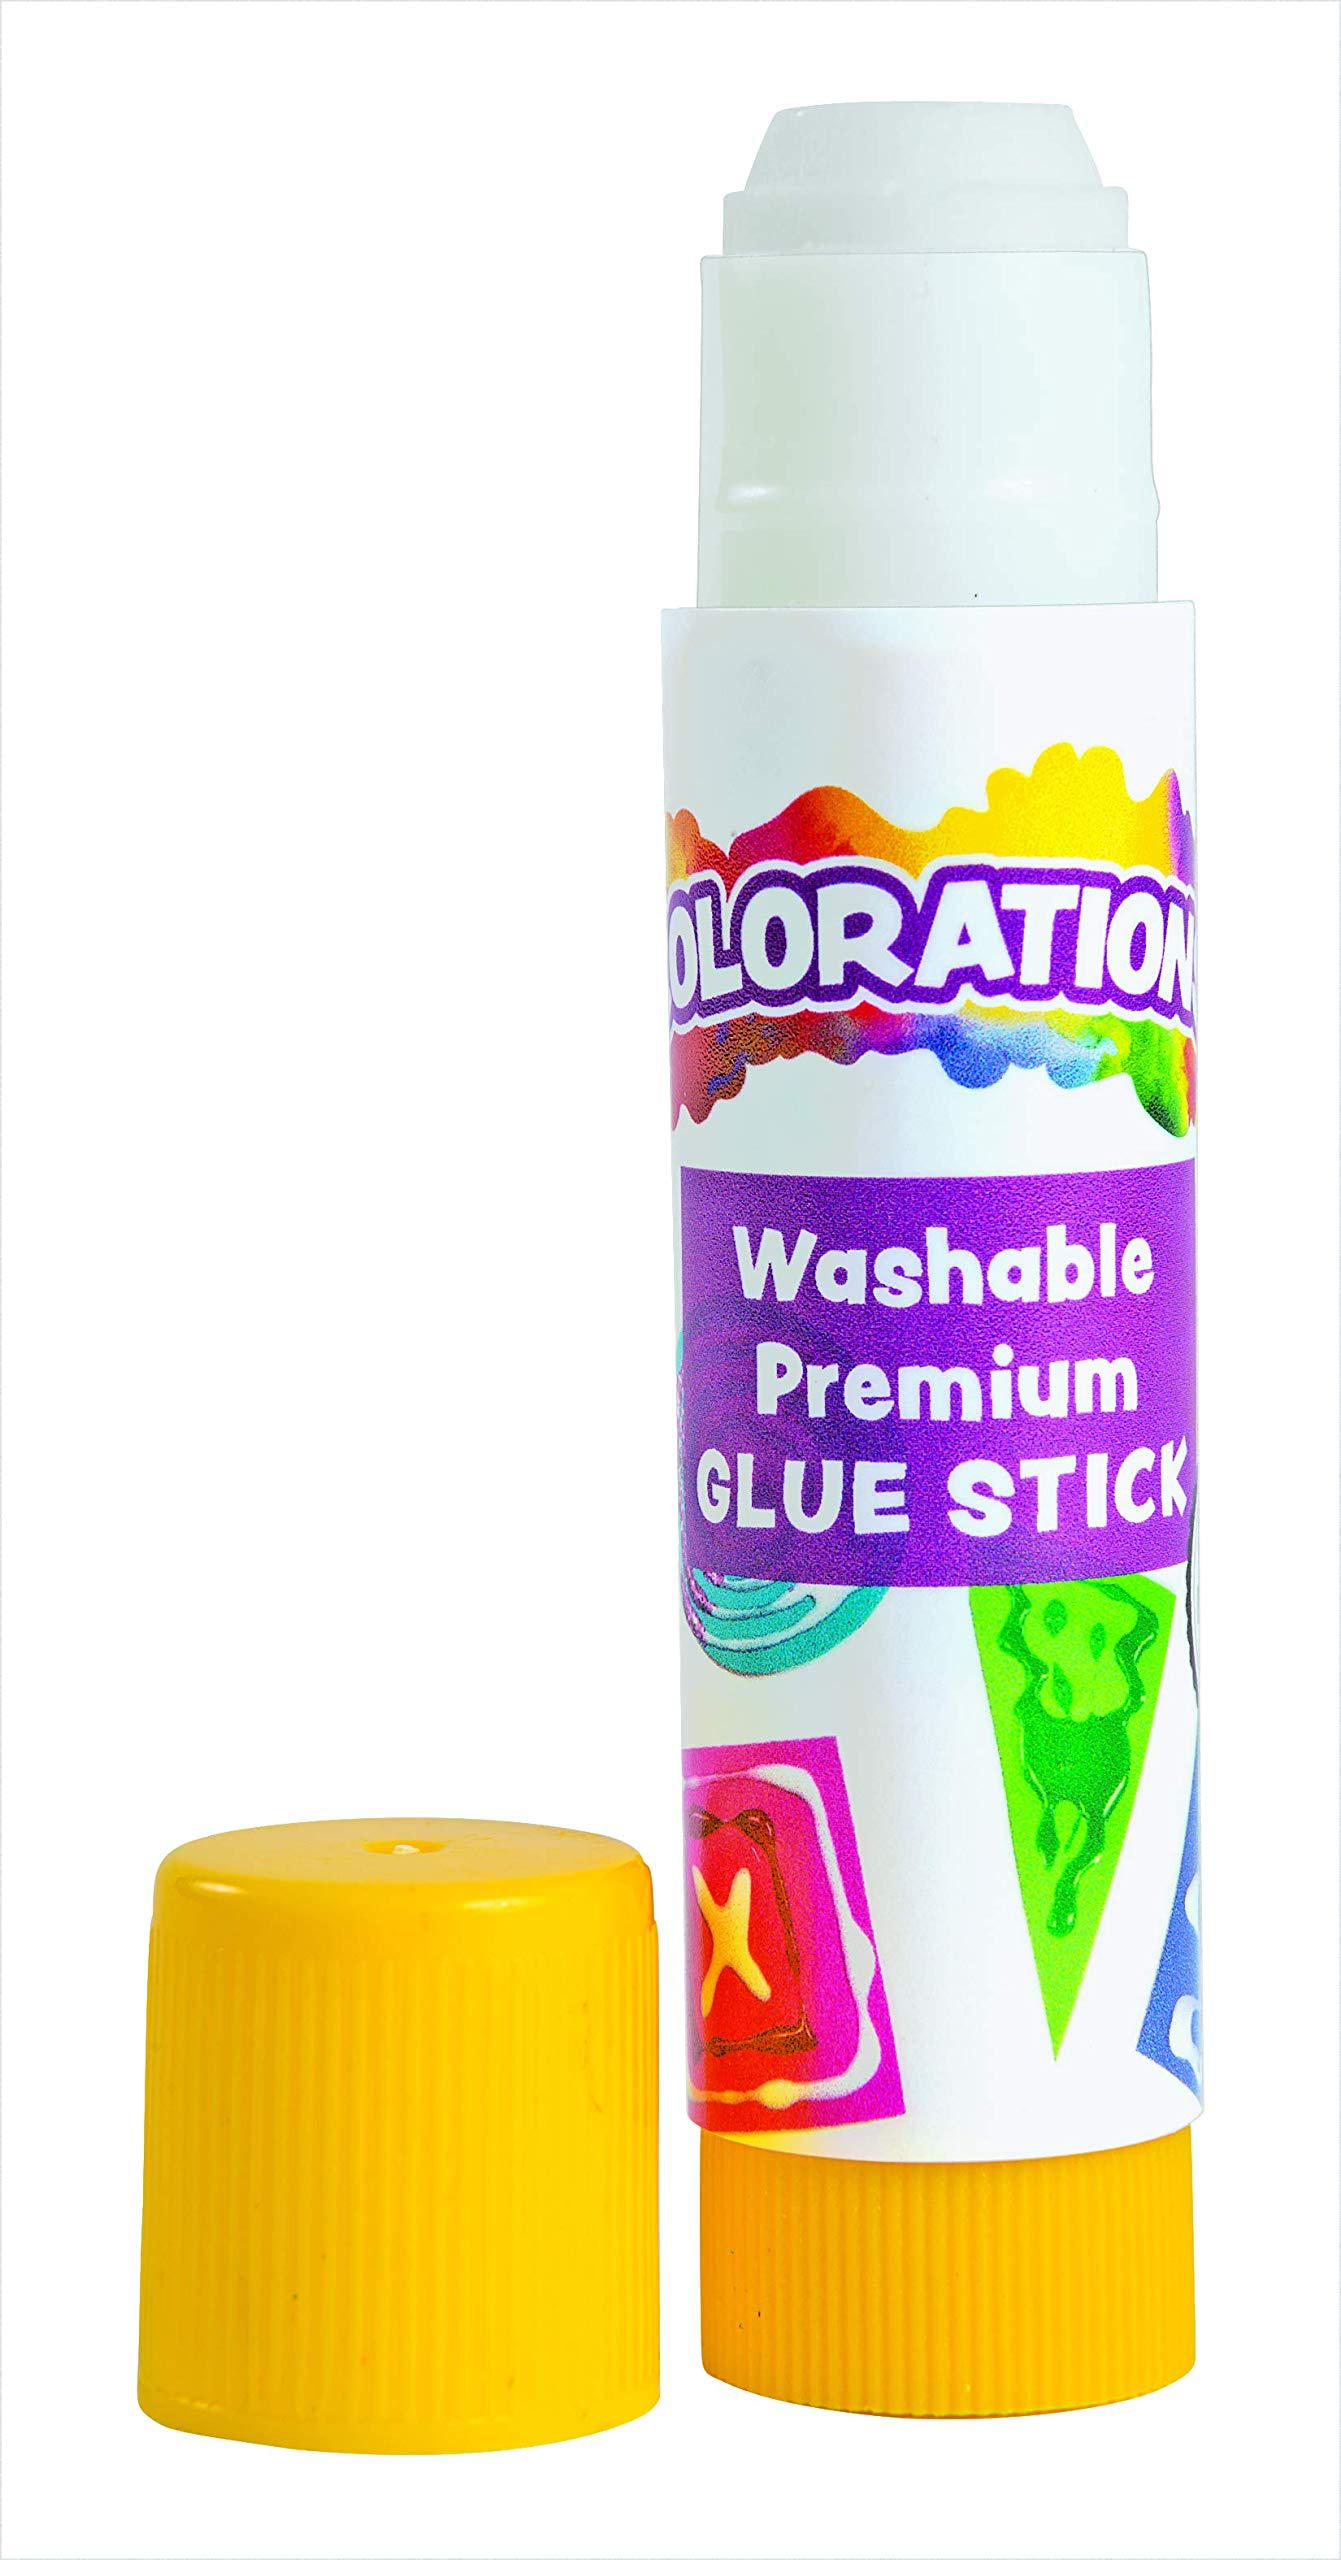 colorations washable glue sticks, premium classroom art supplies, safe easy-to-spread adhesive, preschool, school projects, c